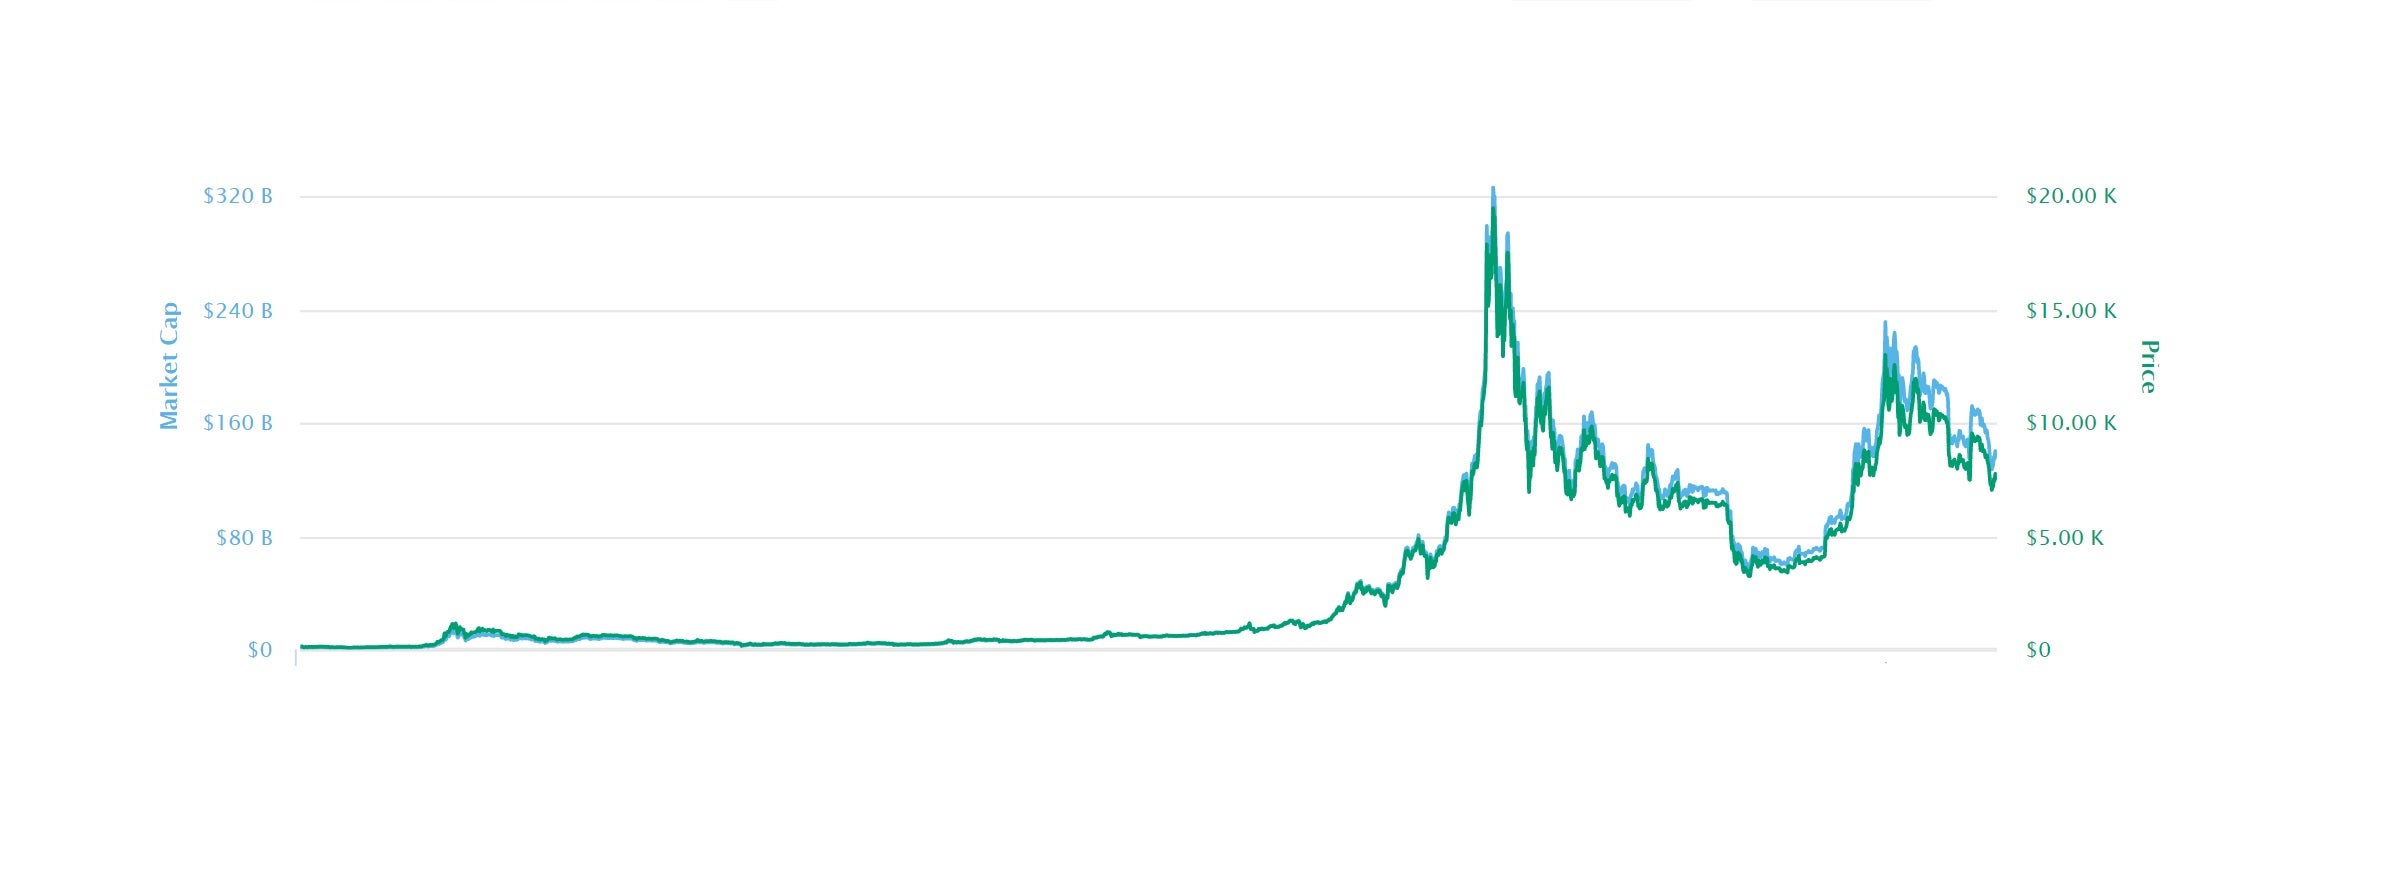 Bitcoin’s first major price burst in 2013 was a small blip compared to subsequent price spikes of the 2010s